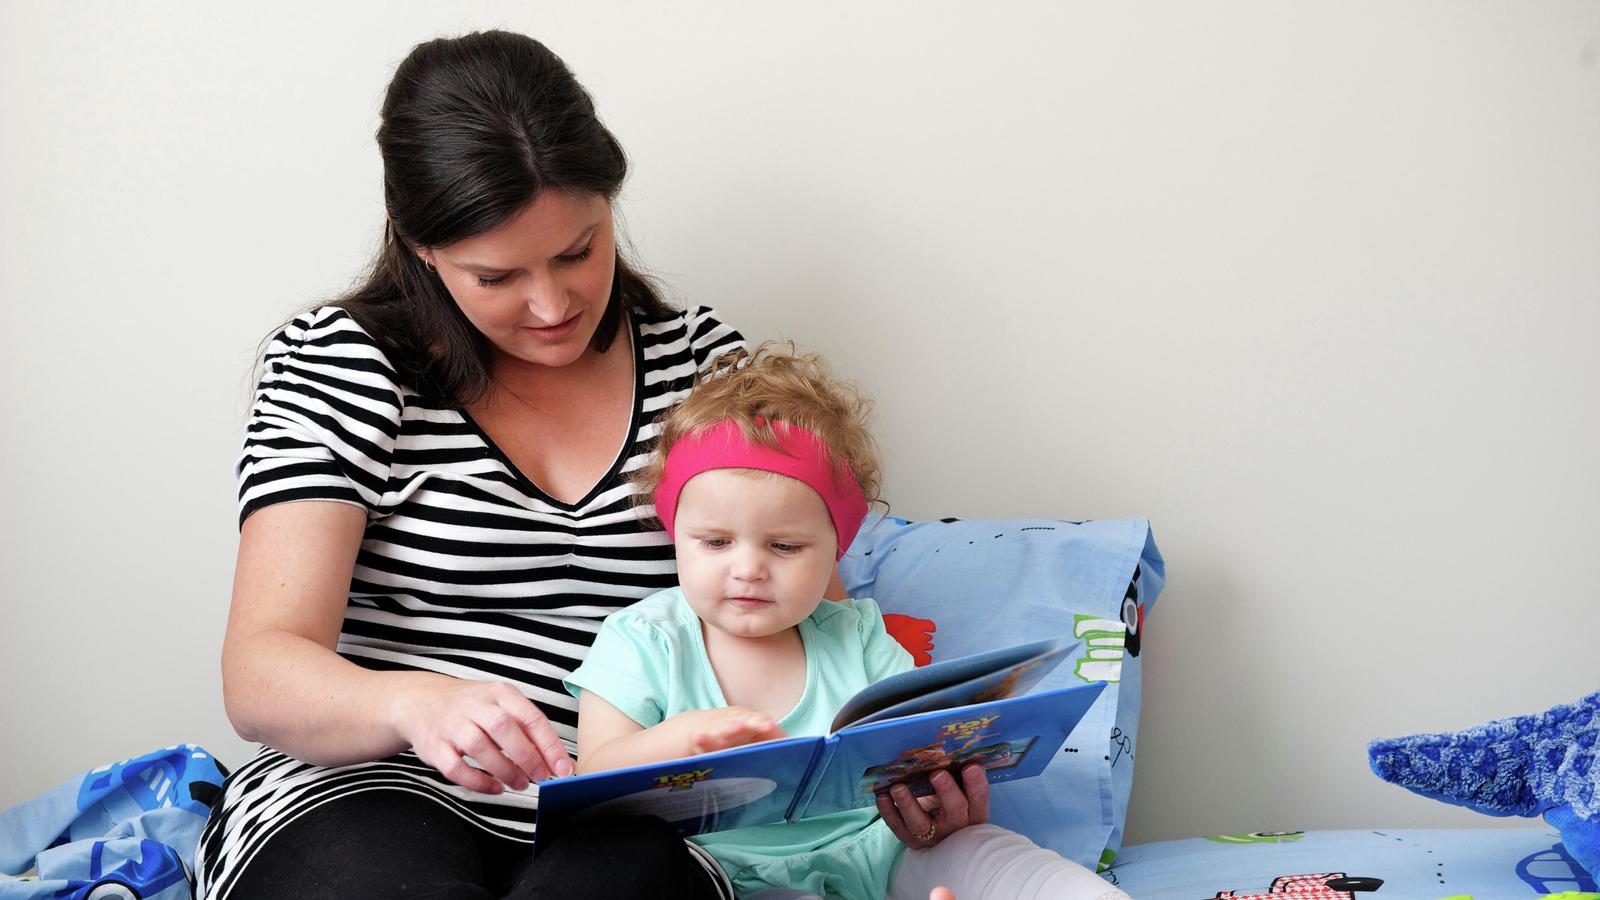 A woman reads a book to a child wearing a hearing device